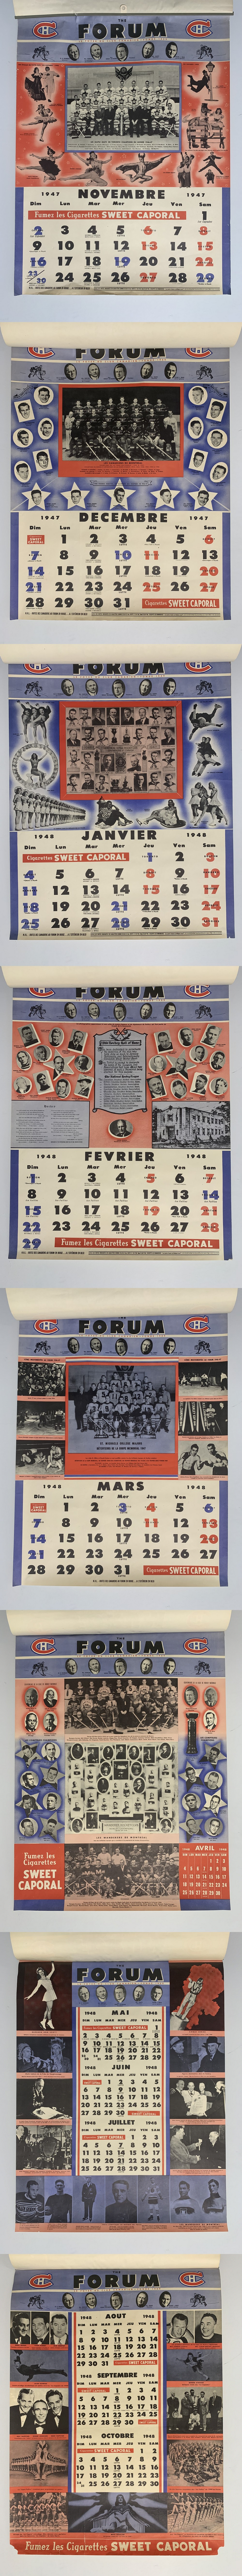 1947-48 SWEET CAPORAL MONTREAL CANADIENS FULL CALENDAR photo